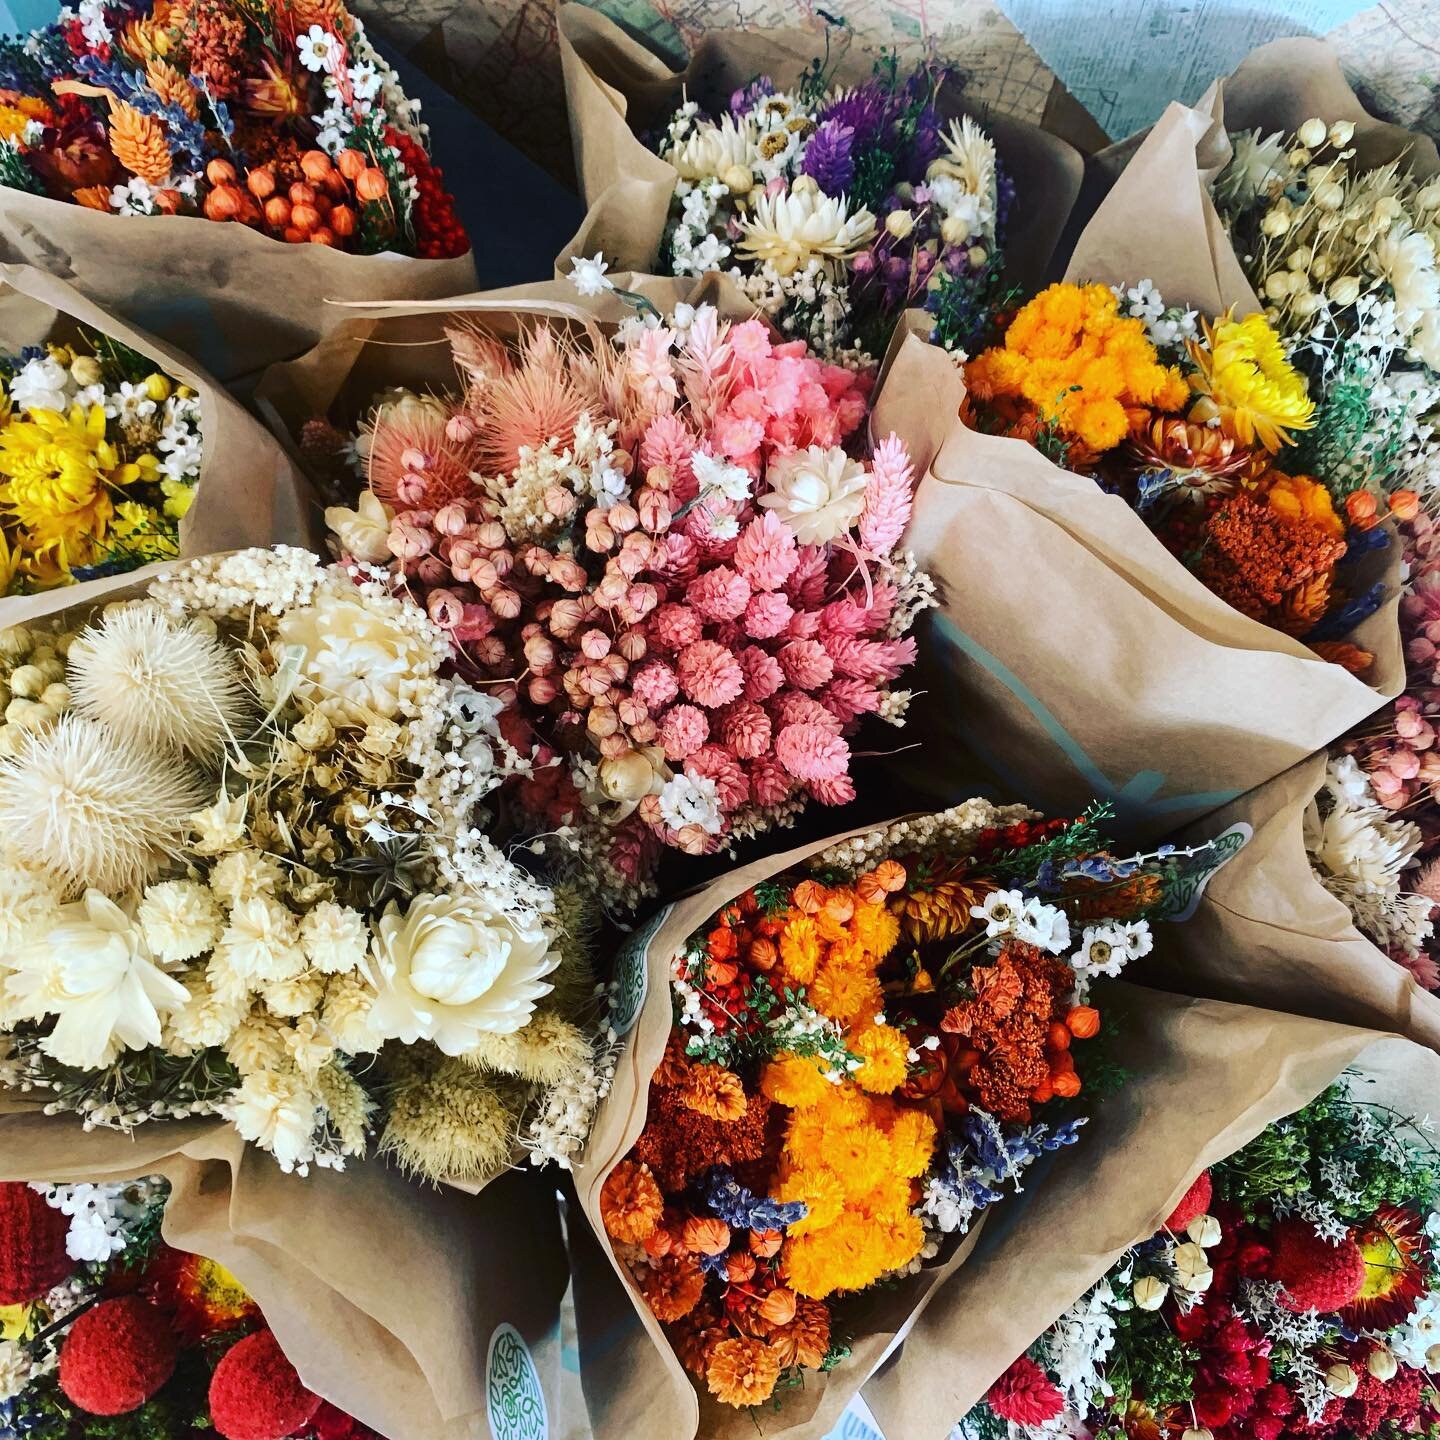 Come check out our beautiful grab n&rsquo; go dried bouquets for Mother&rsquo;s Day!